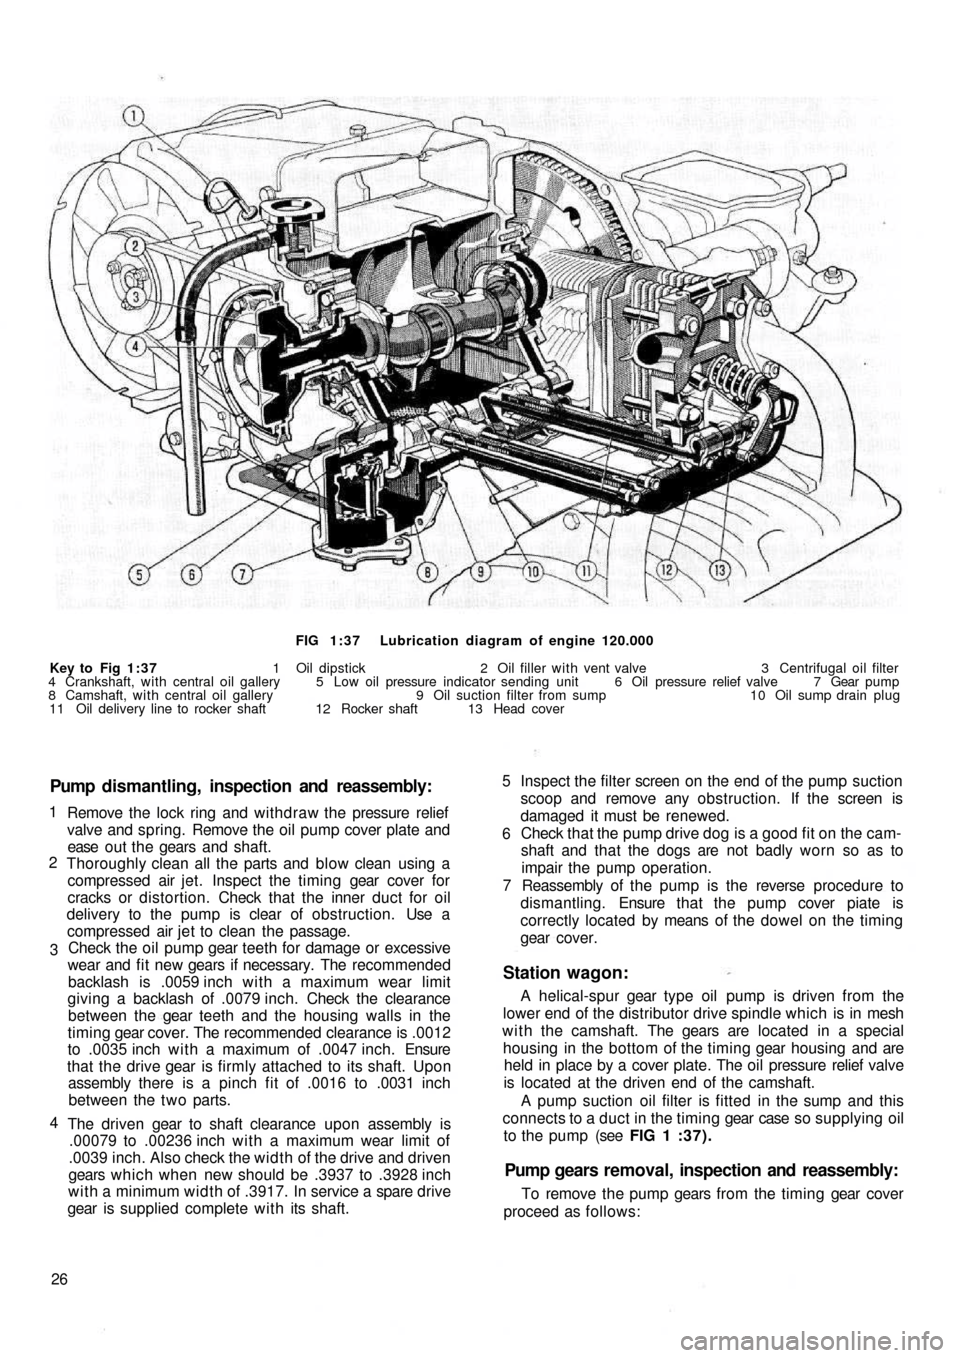 FIAT 500 1960 1.G User Guide FIG 1:37  Lubrication diagram of engine 120.000
Key to  Fig  1:37 1 Oil dipstick 2 Oil filler with vent valve  3 Centrifugal oil filter
4 Crankshaft, with central oil gallery  5  Low oil pressure indi